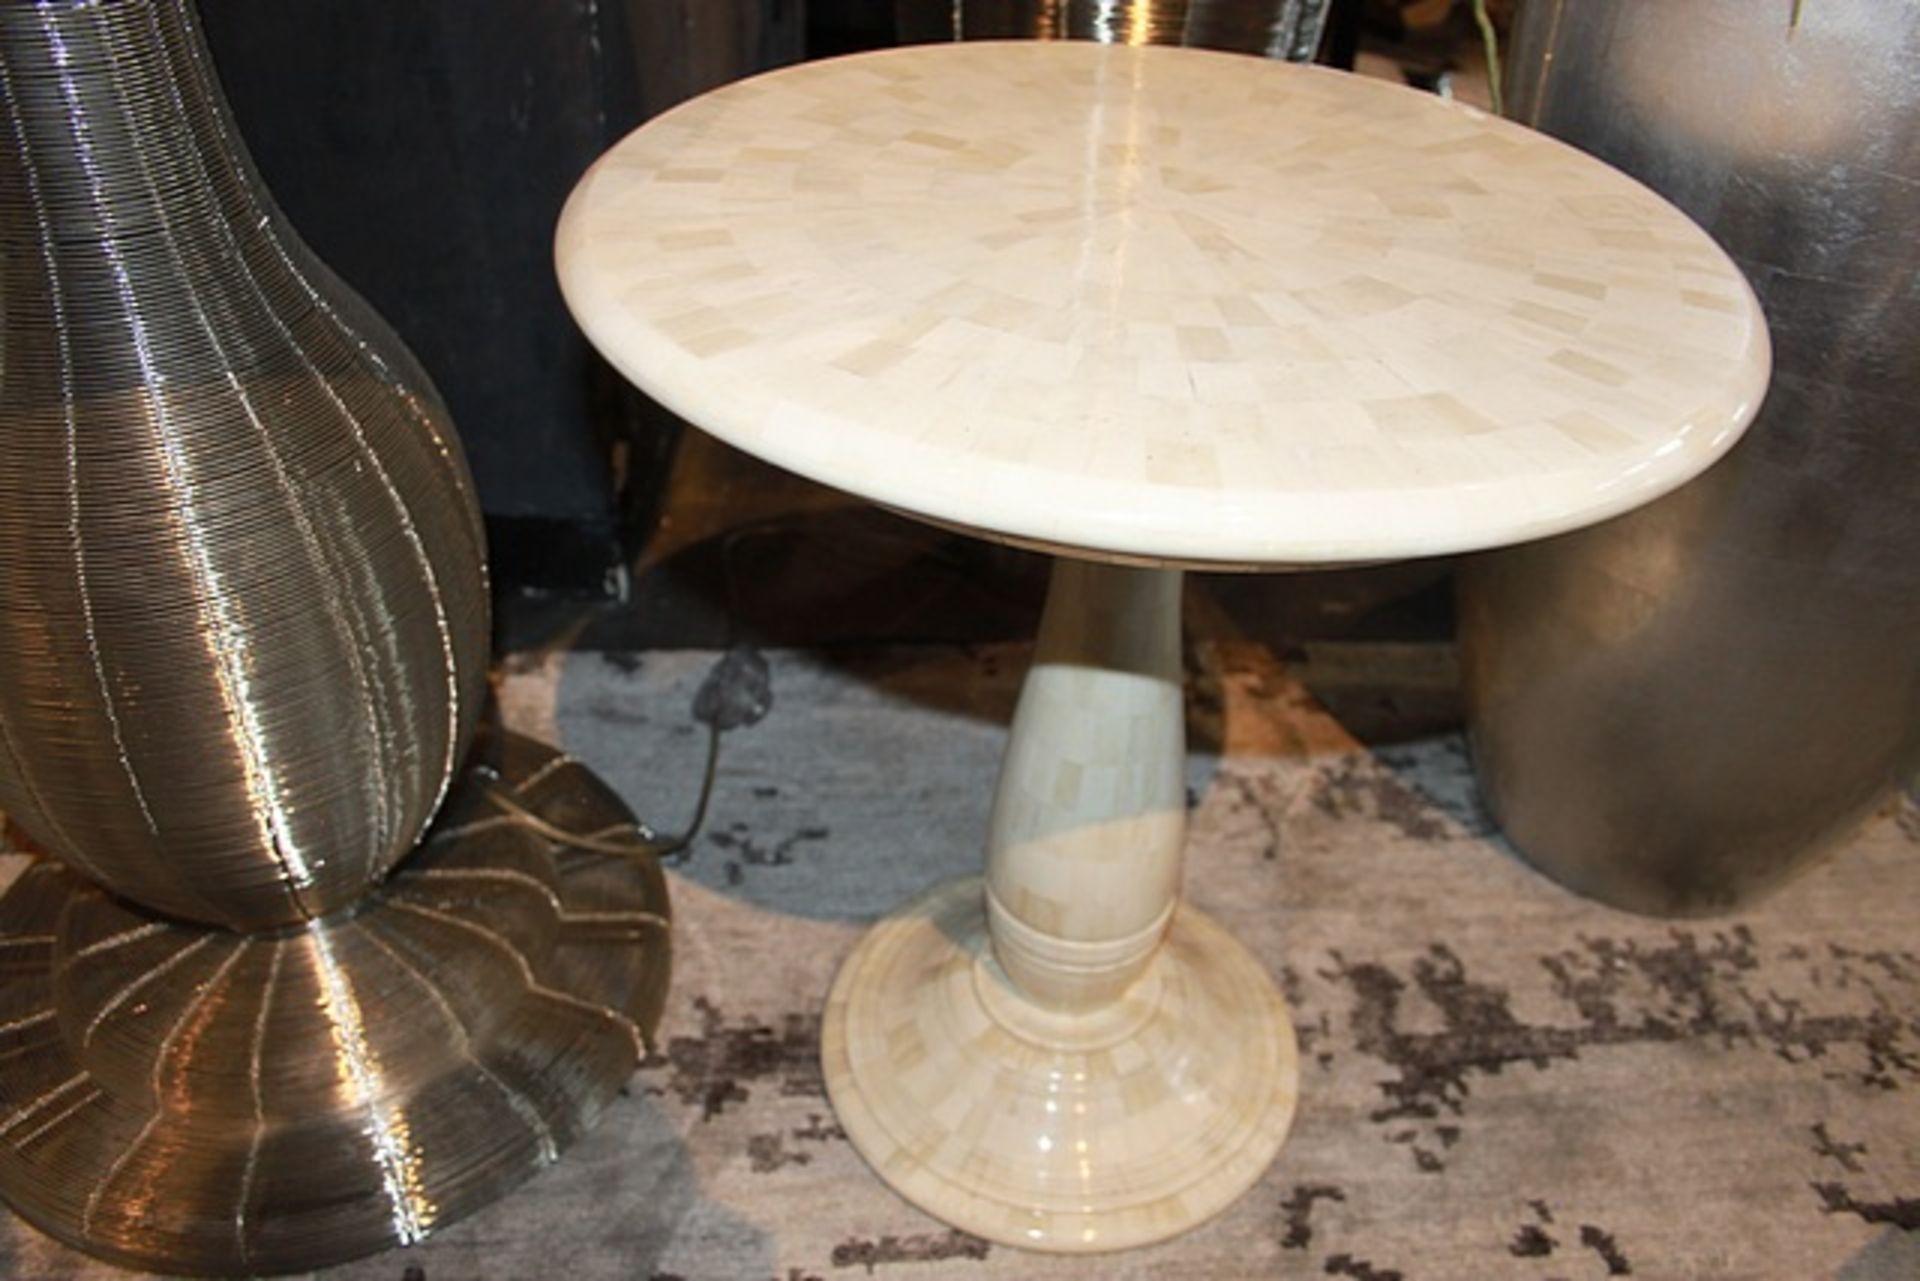 Side Table Alano a real statement piece constructed in polished white buffalo bone being a porous